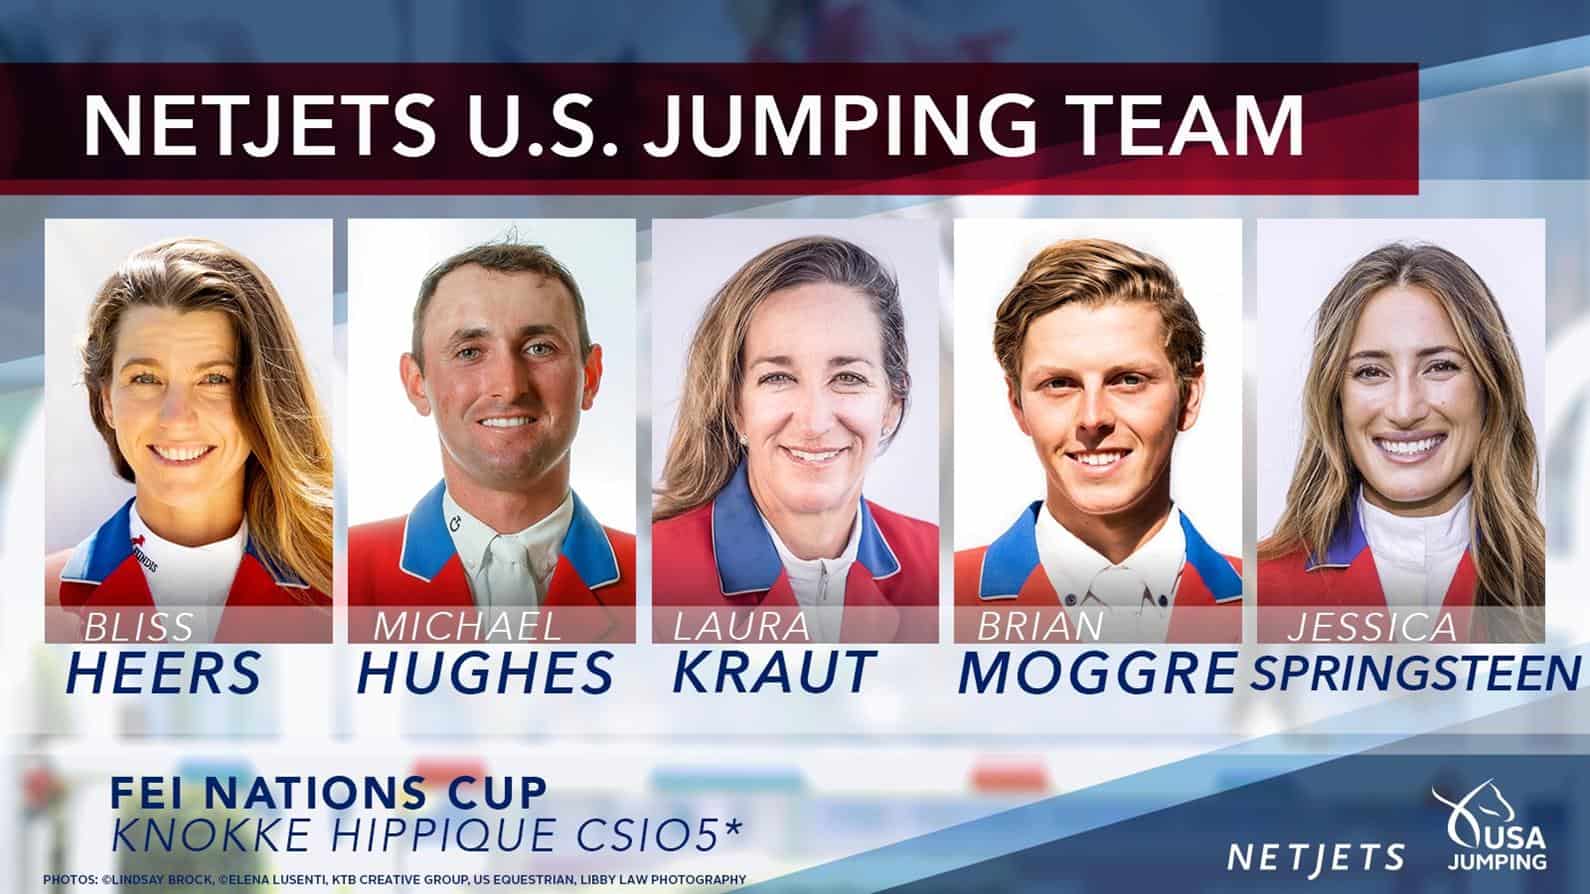 U.S. FEI Jumping Nations Cup Knokke Hippique CSIO5*